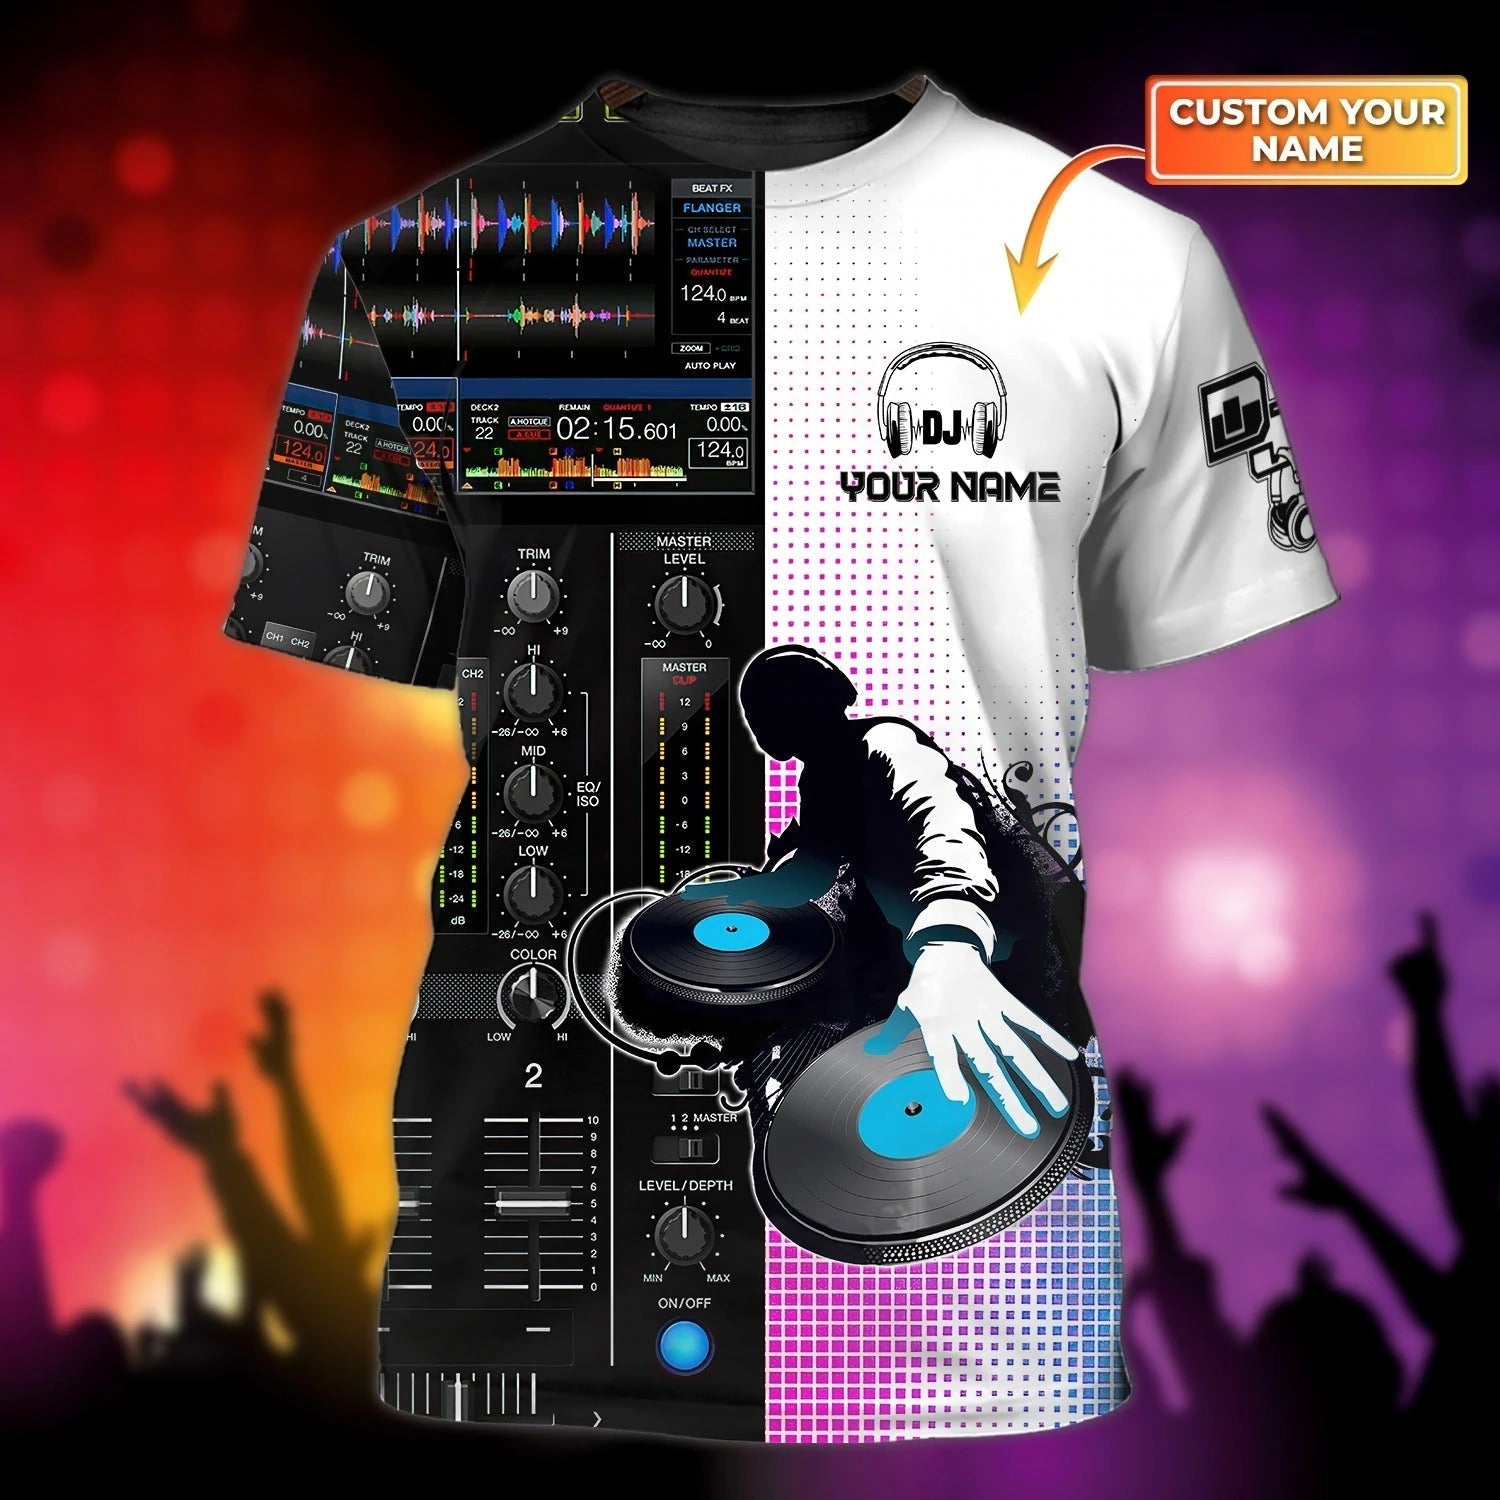 Customized With Name Dj 3D All Over Print Shirt For Men And Woman/ Cool Dj Shirts/ Best Gift To A Disc Jockey